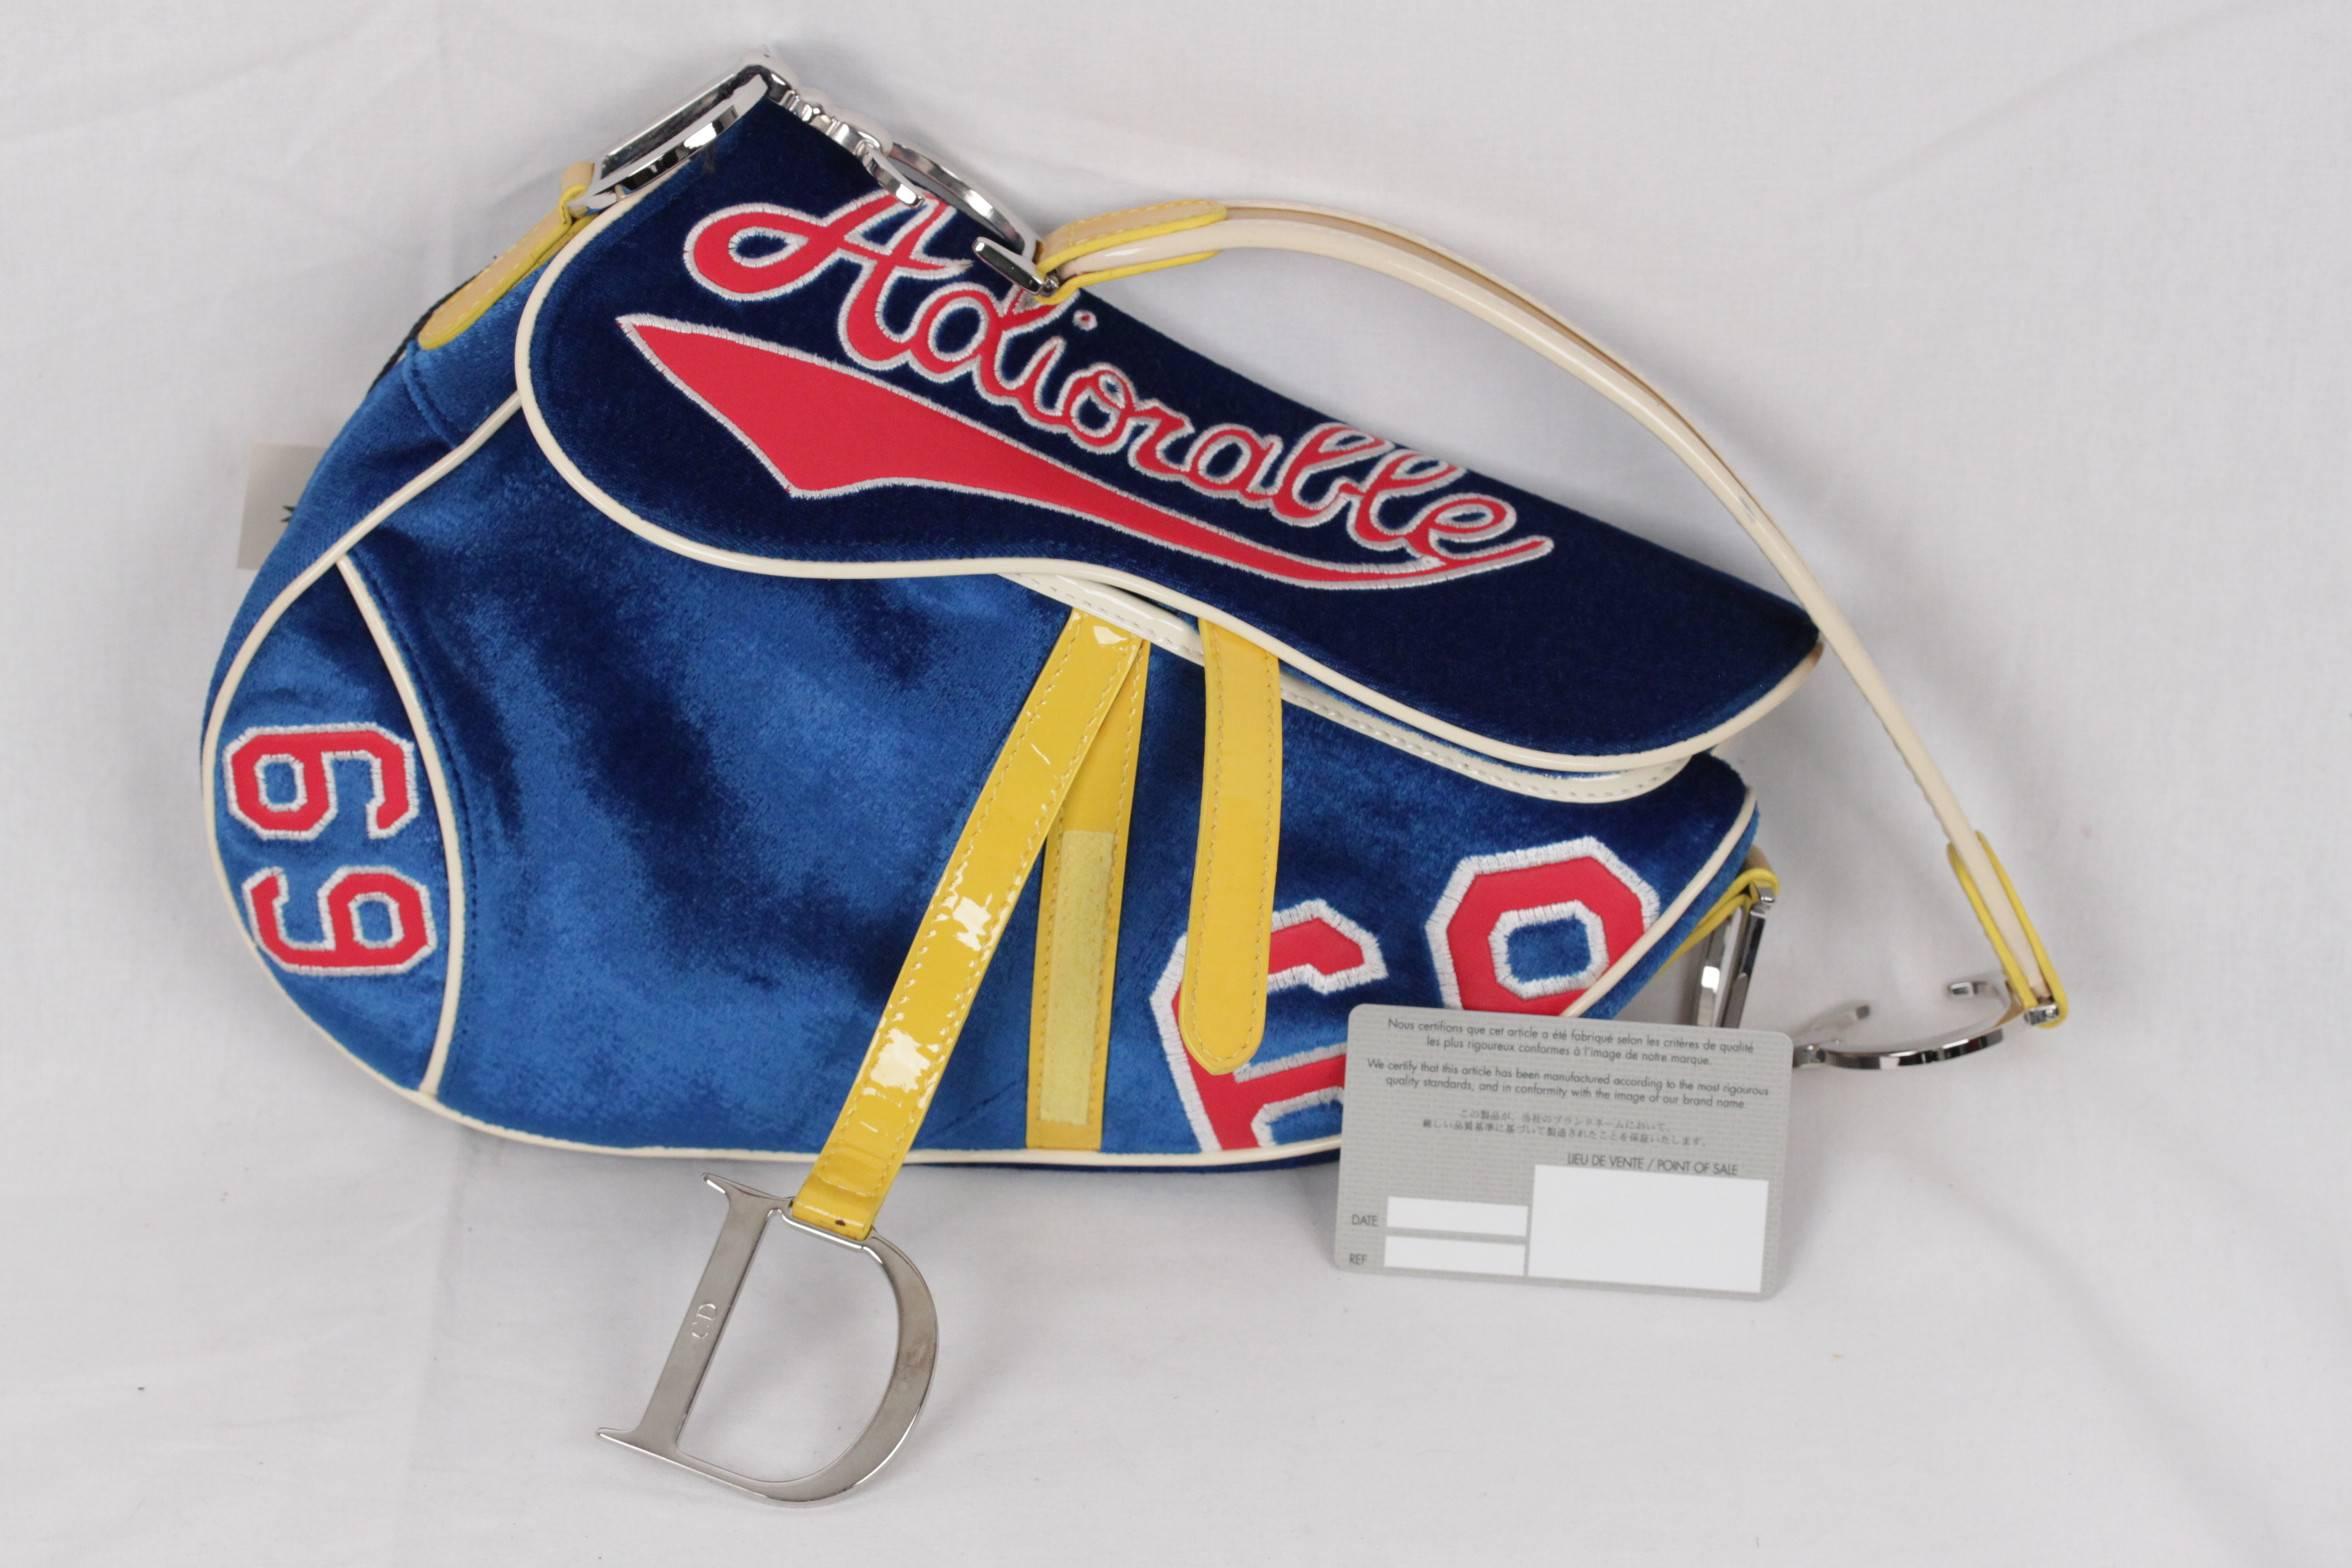 
- Limited Edition Blue velour velvet Christian Dior 'Adiorable' Saddle bag
- Yellow patent leather handle and trim
- Embroidered red leather 'Adiorable' and '69' numbers at front
- Back pocket
- Flap top with velcro closure
- Monogrammed navy